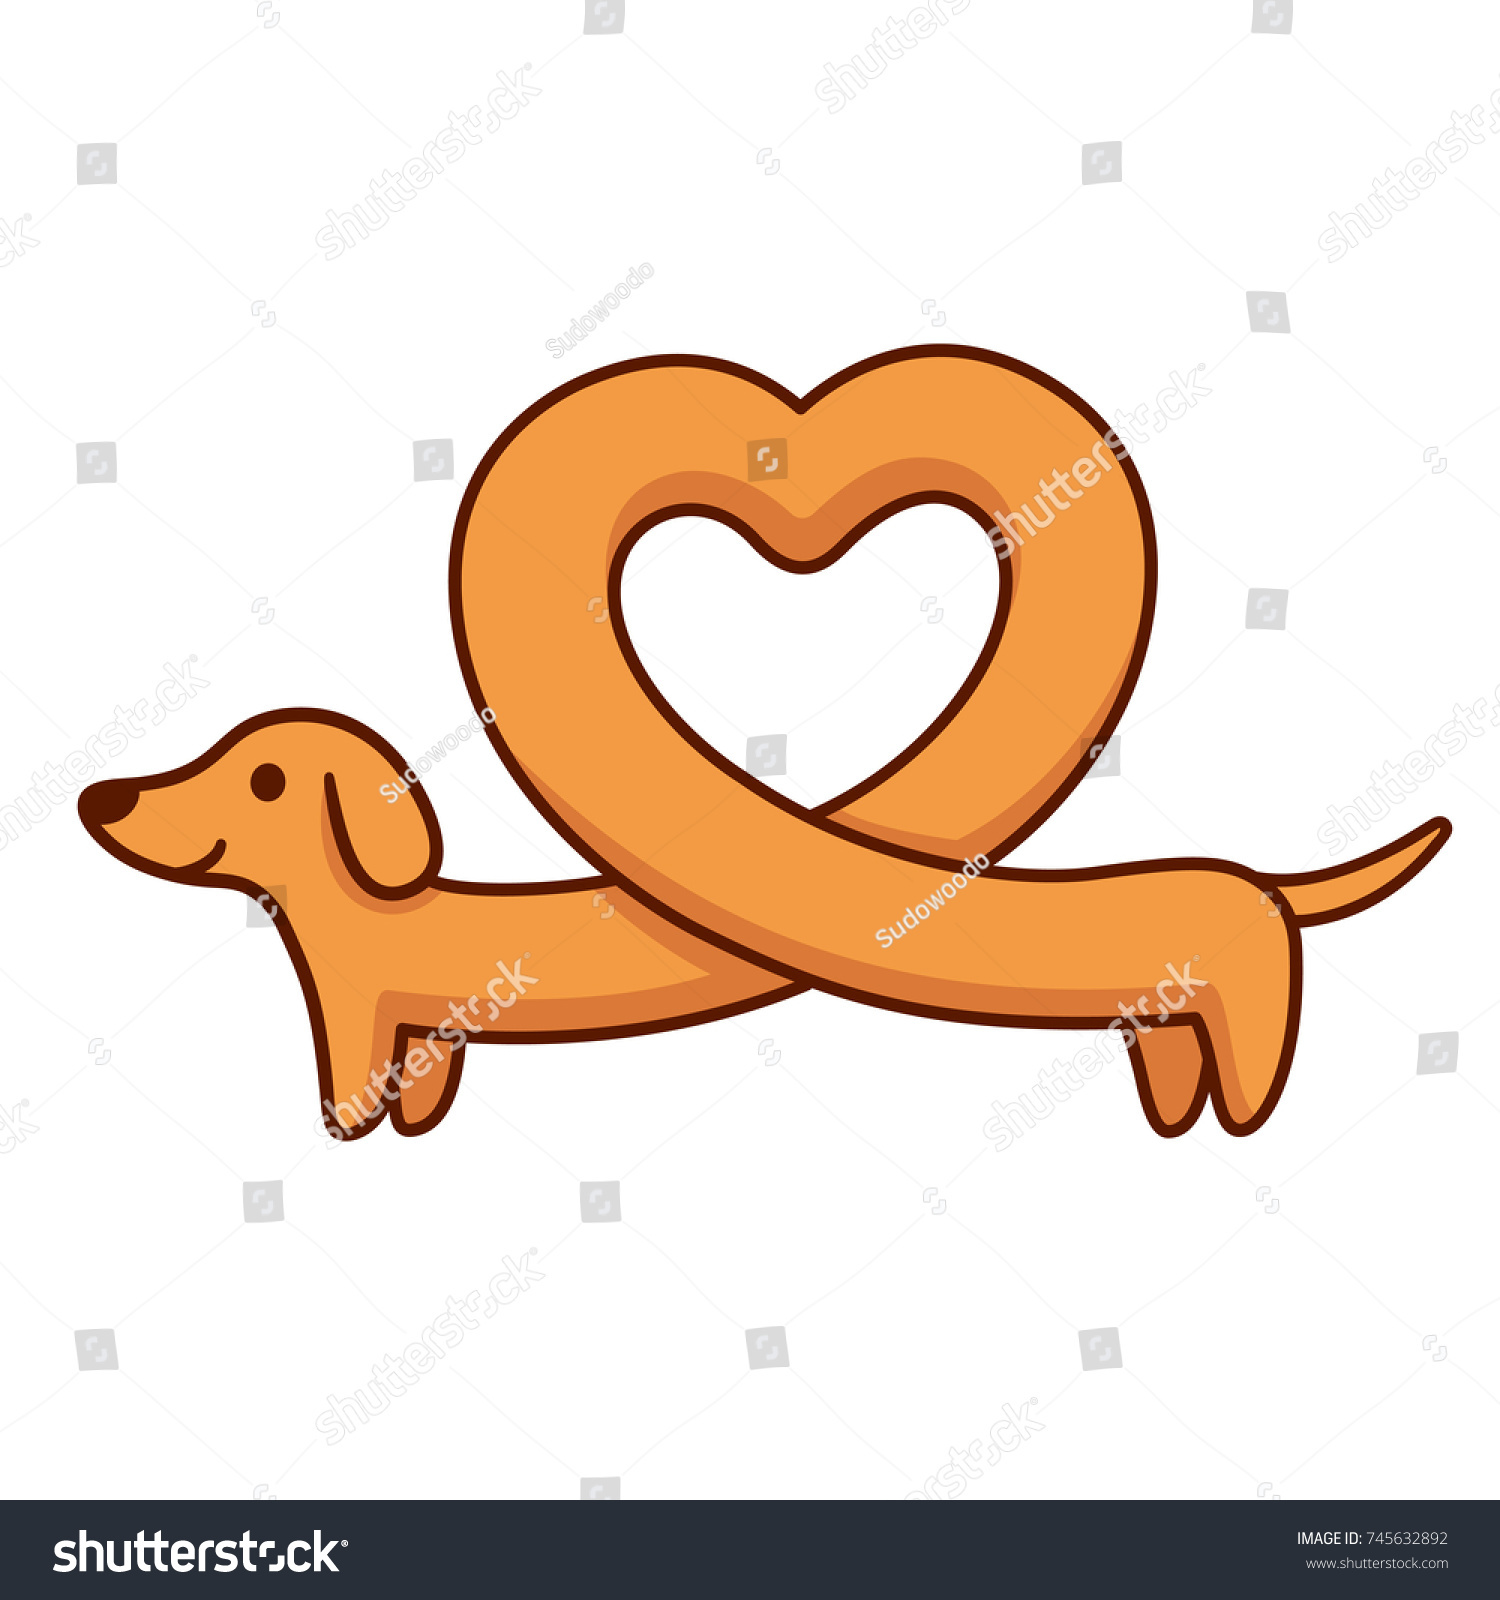 SVG of Cute cartoon dachshund with heart shaped body, funny long wiener dog. St. Valentines day greeting card vector illustration. svg